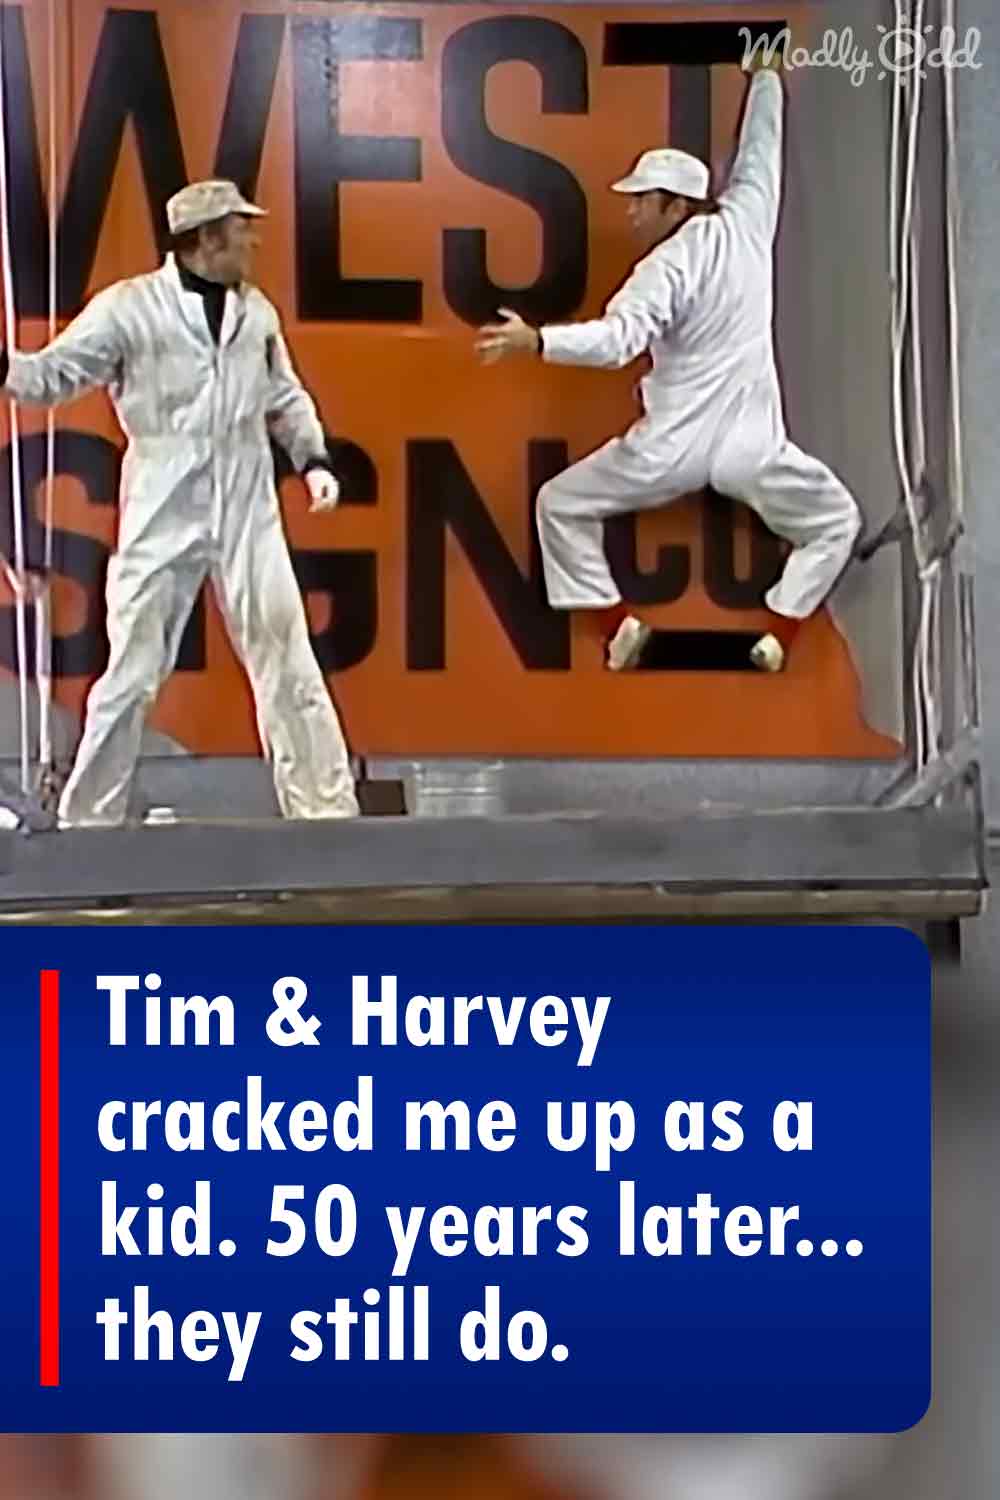 Tim & Harvey cracked me up as a kid. 50 years later... they still do.